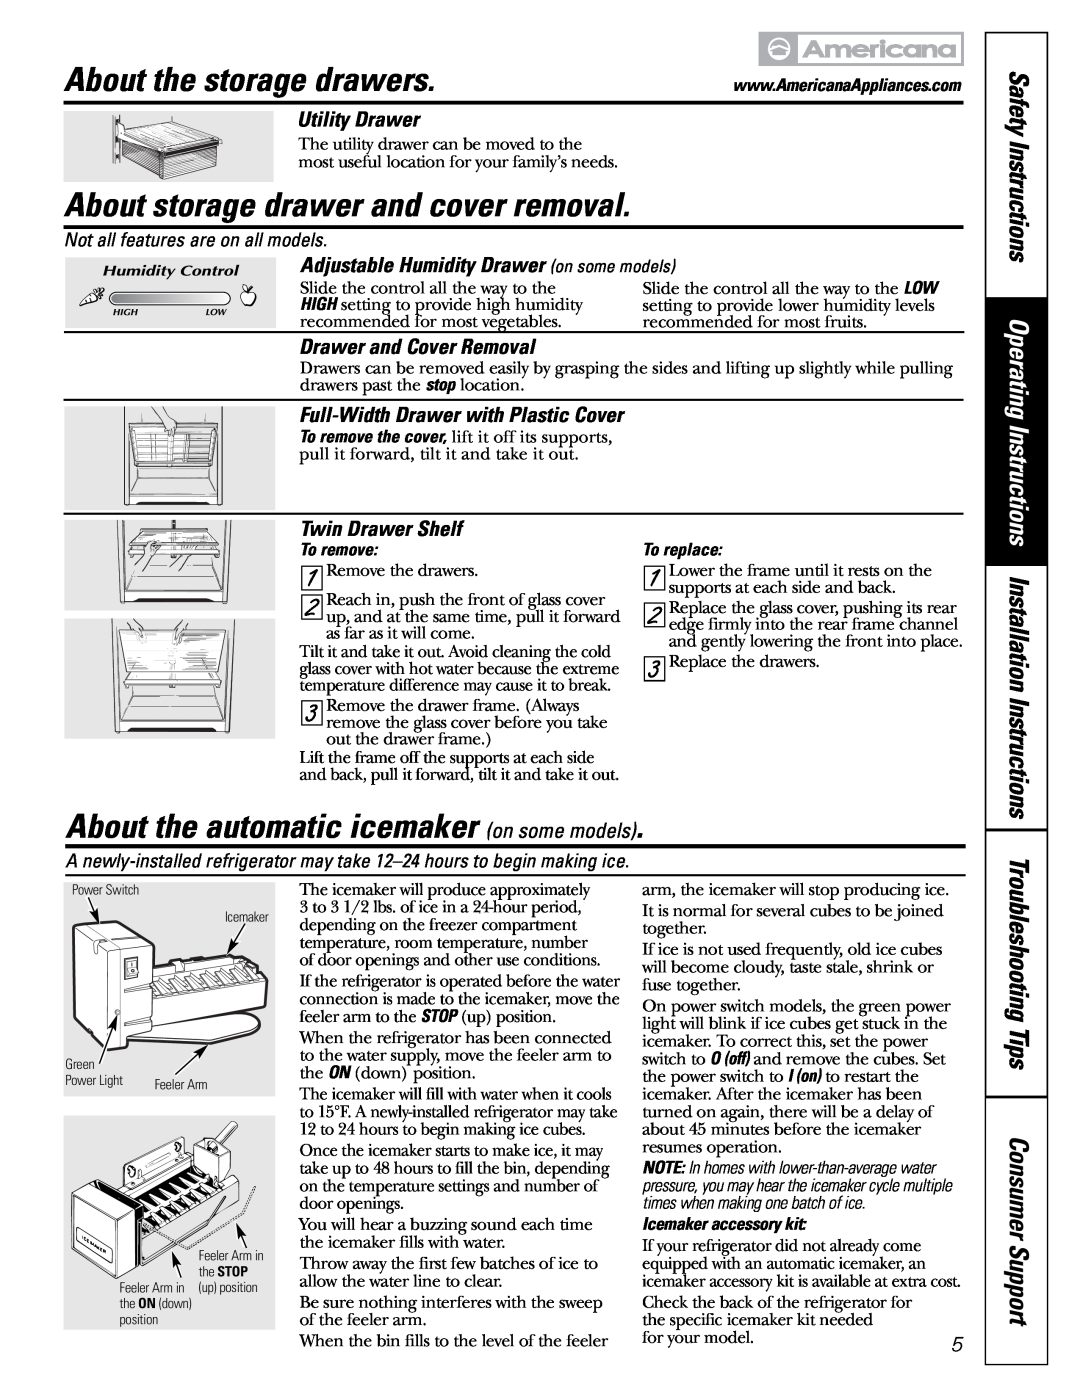 Americana Appliances 197D5984P004 About storage drawer and cover removal, About the automatic icemaker on some models 